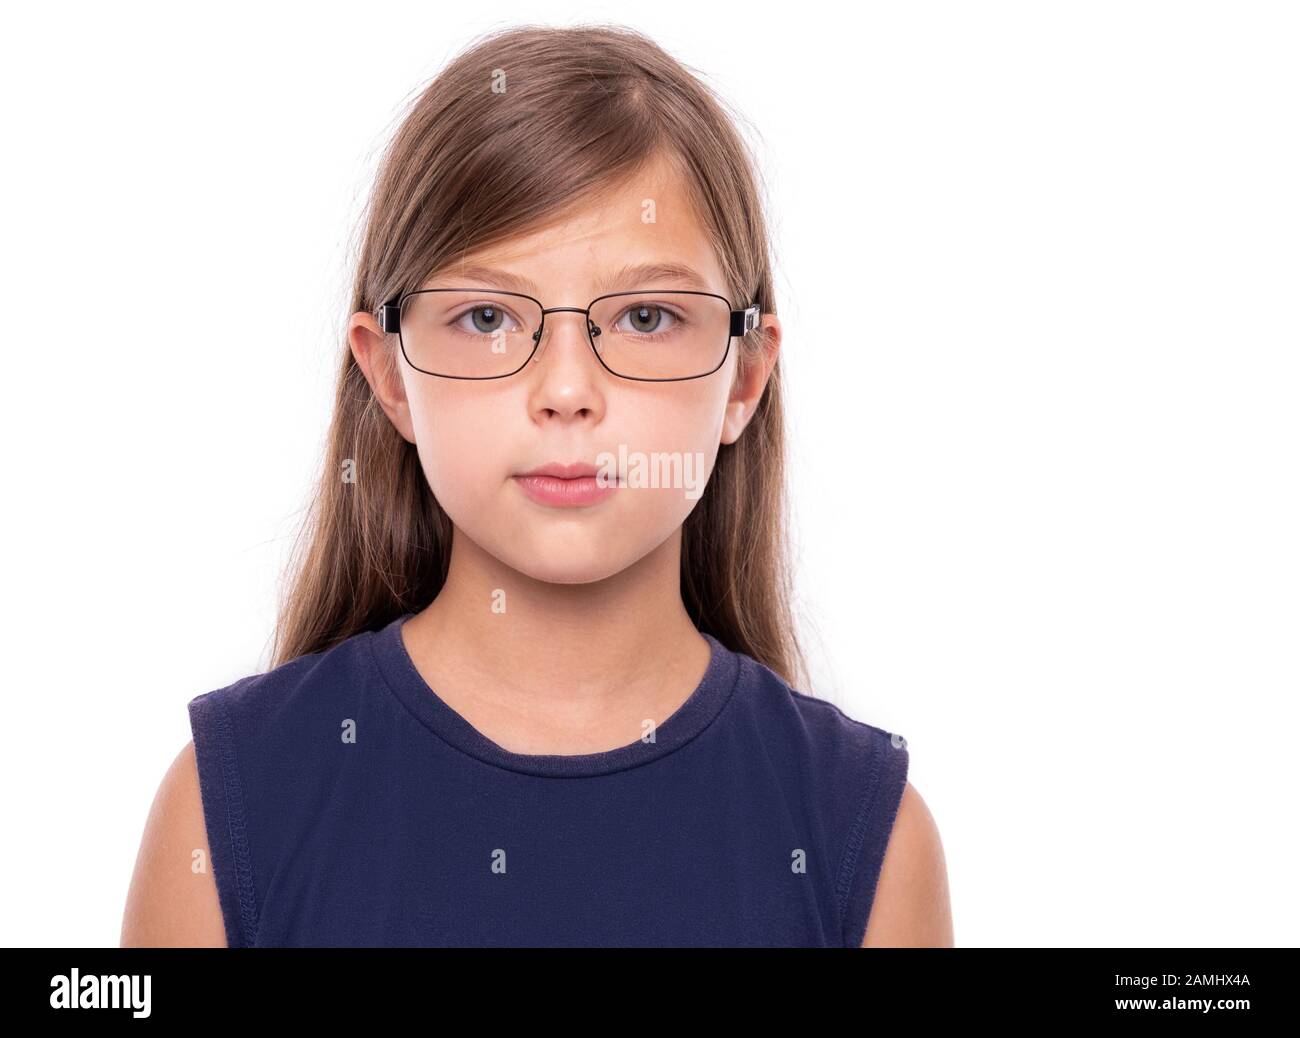 Portrait of a little girl with glasses isolated on white backgroud. Stock Photo